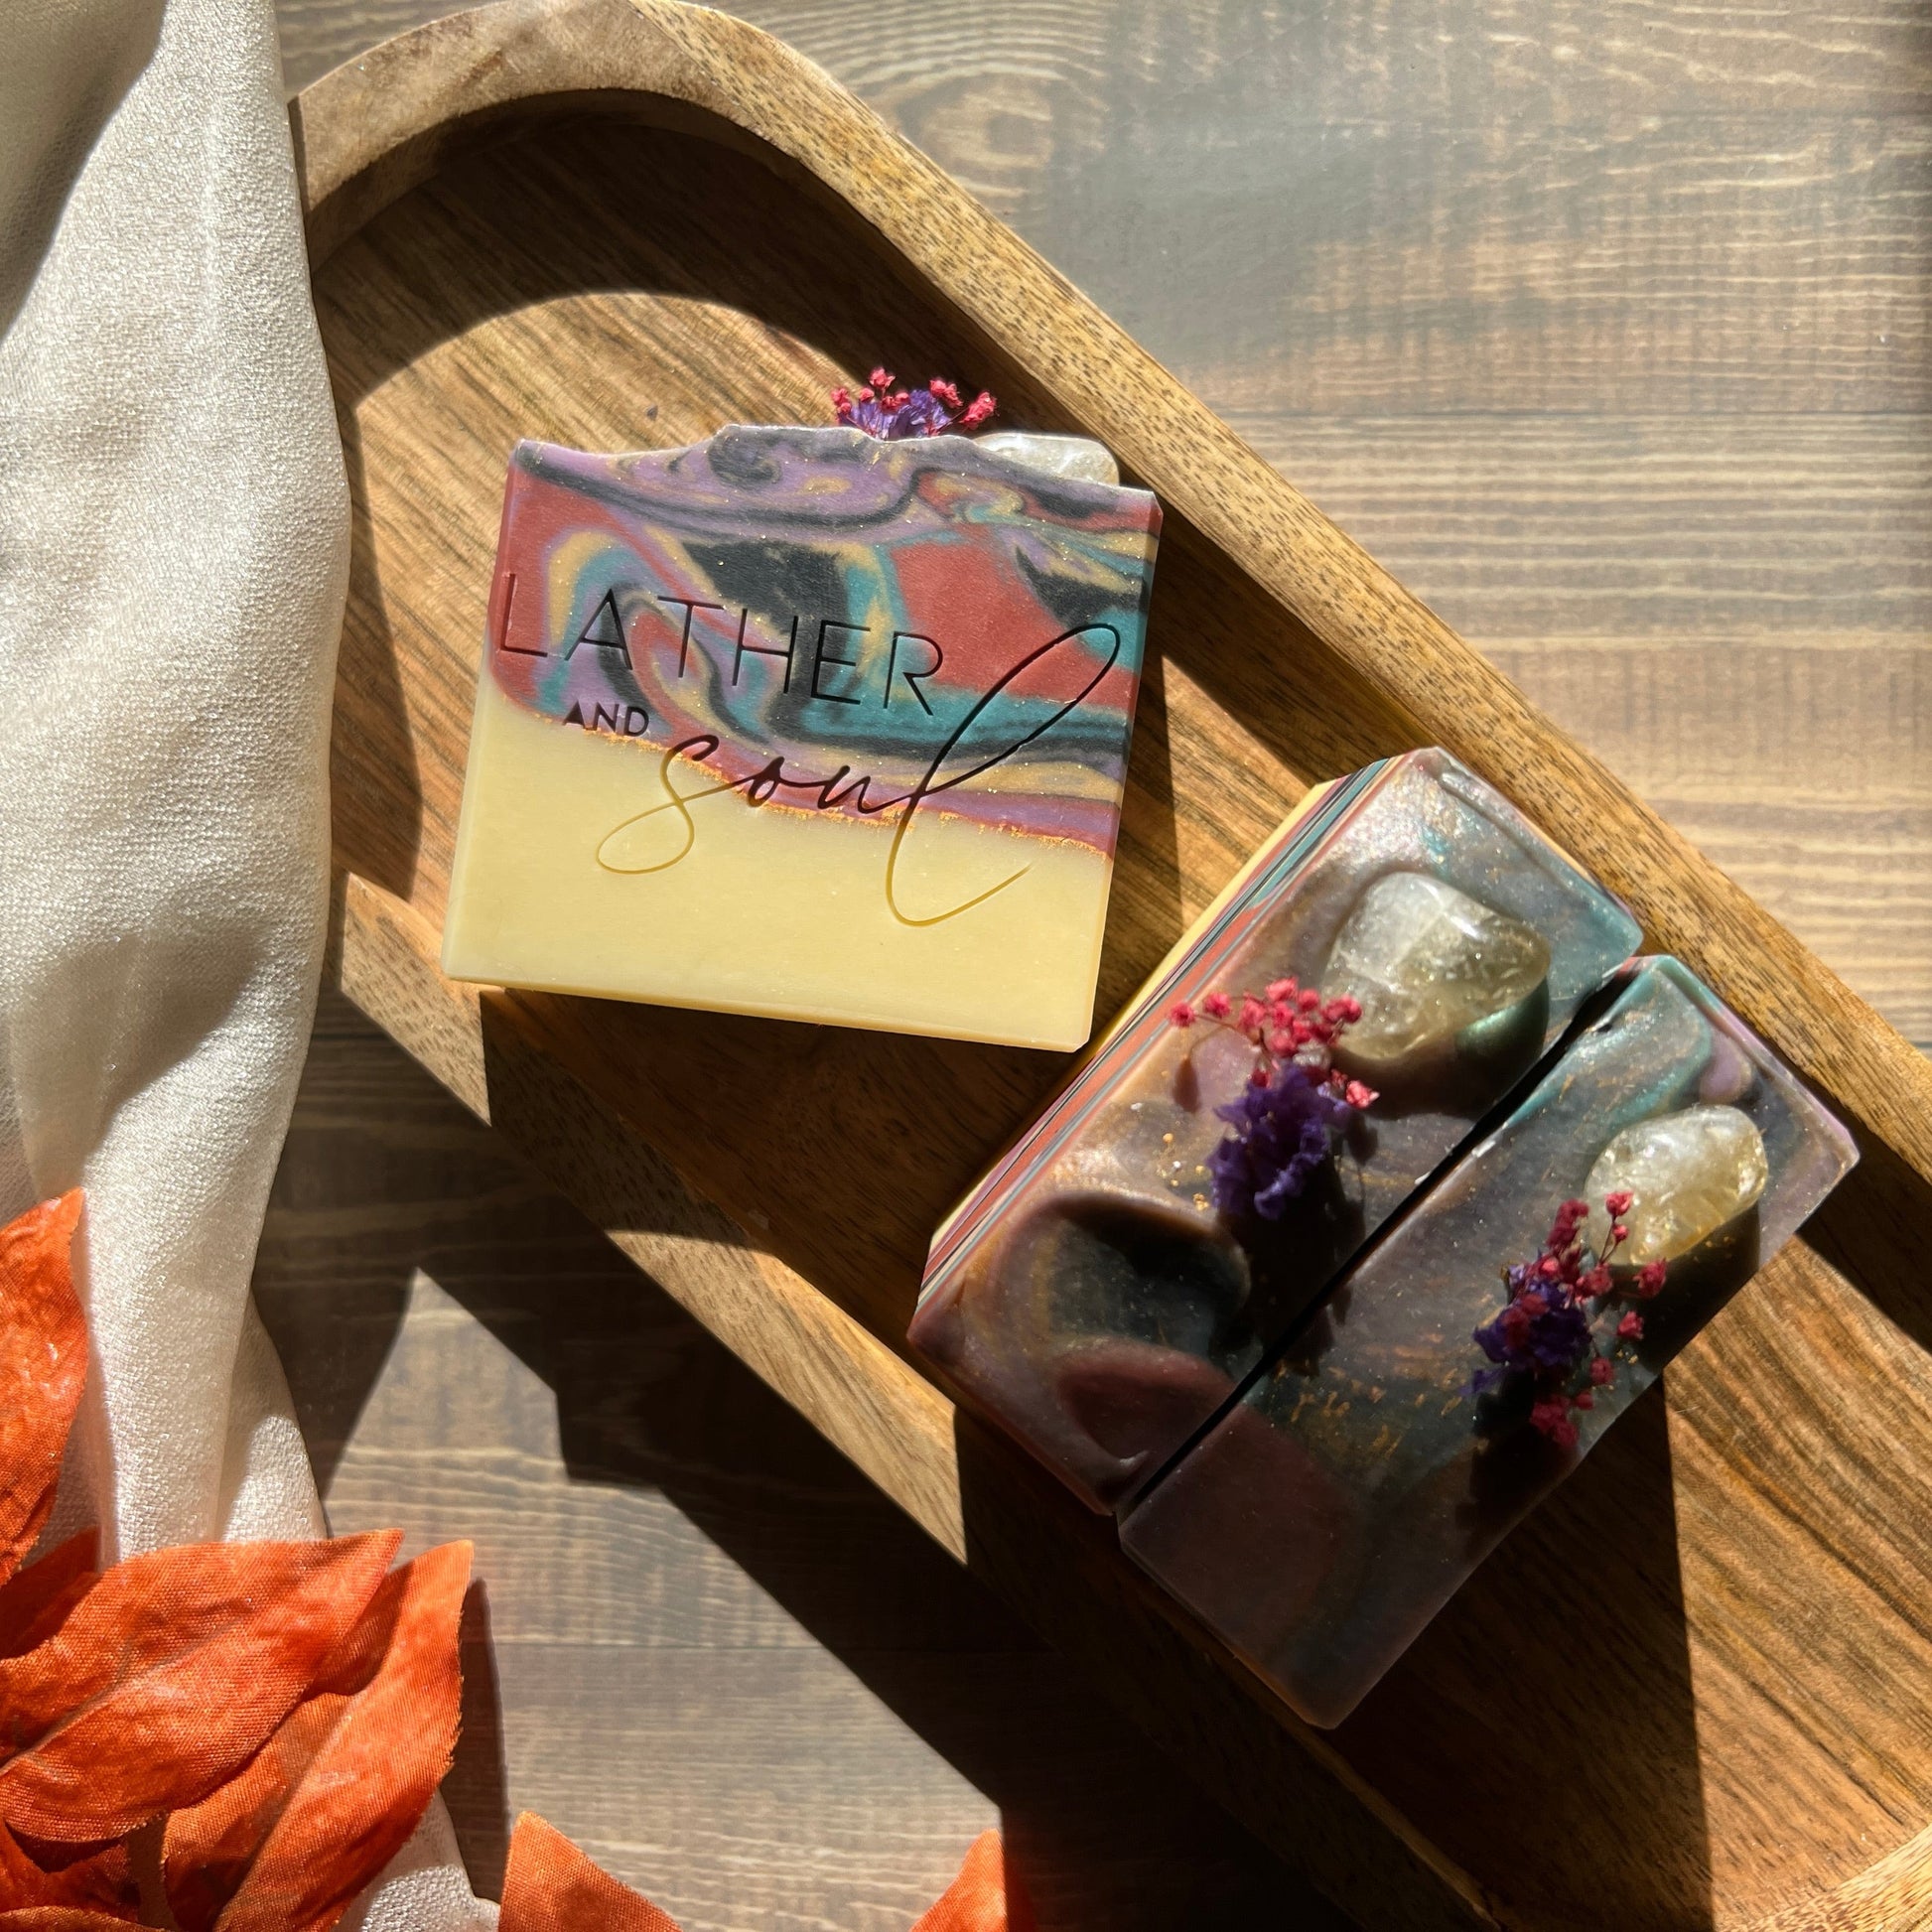 Handmade soap with organic ingredients, and infused with crystals